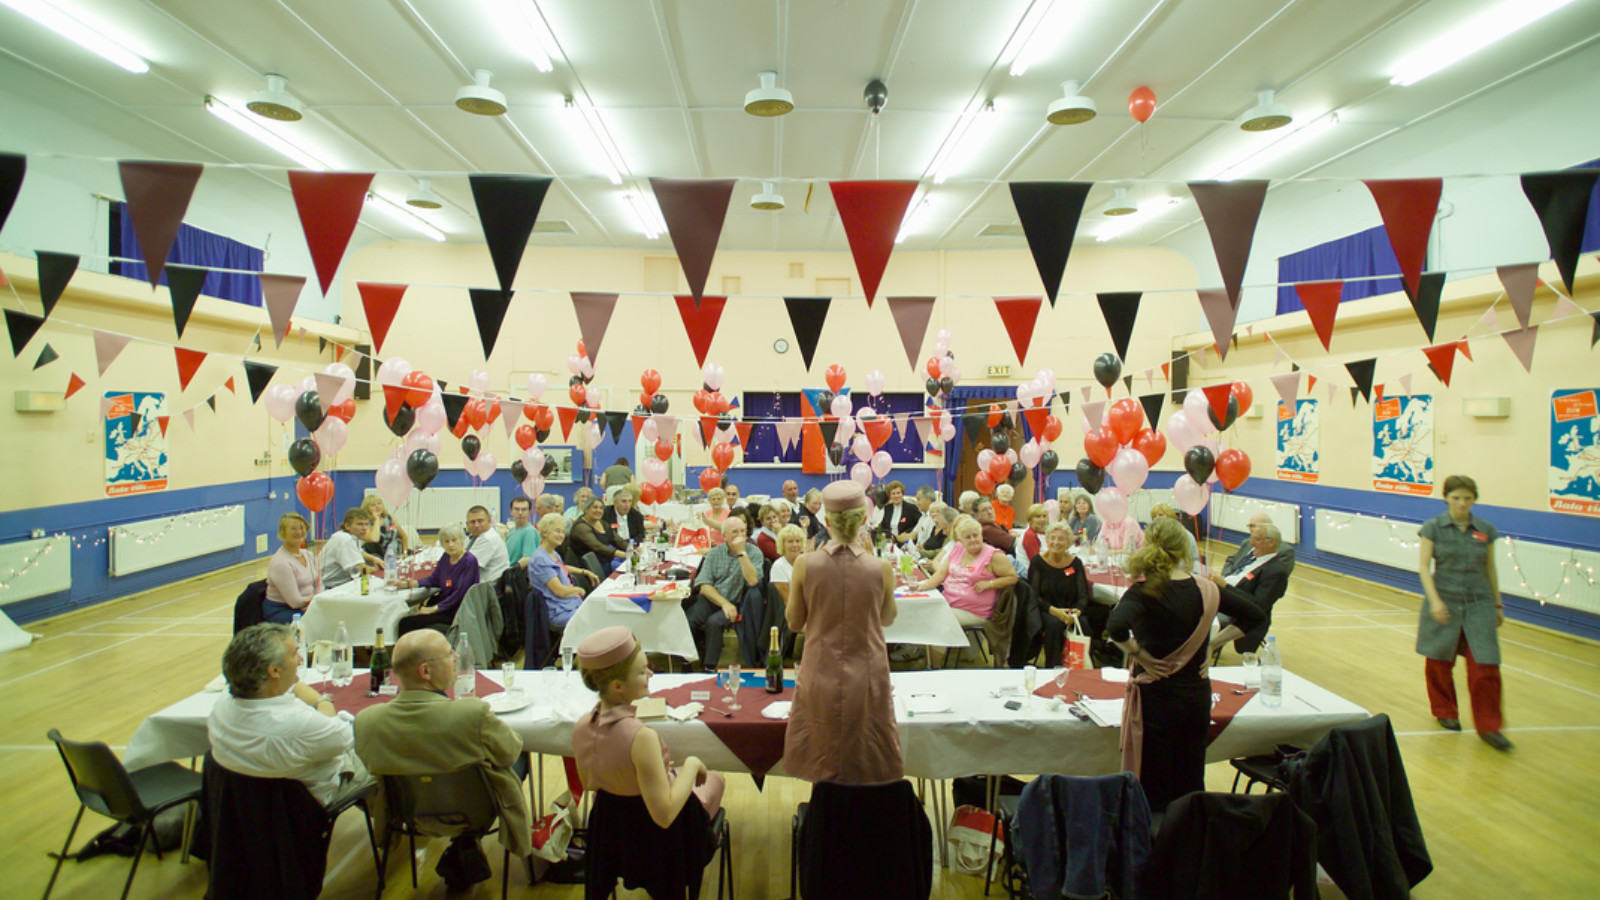 A community hall has tables and chairs set up with colourful bunting and balloons to decorate. People are sat at the tables watching a woman in a pink hat and dress speak.